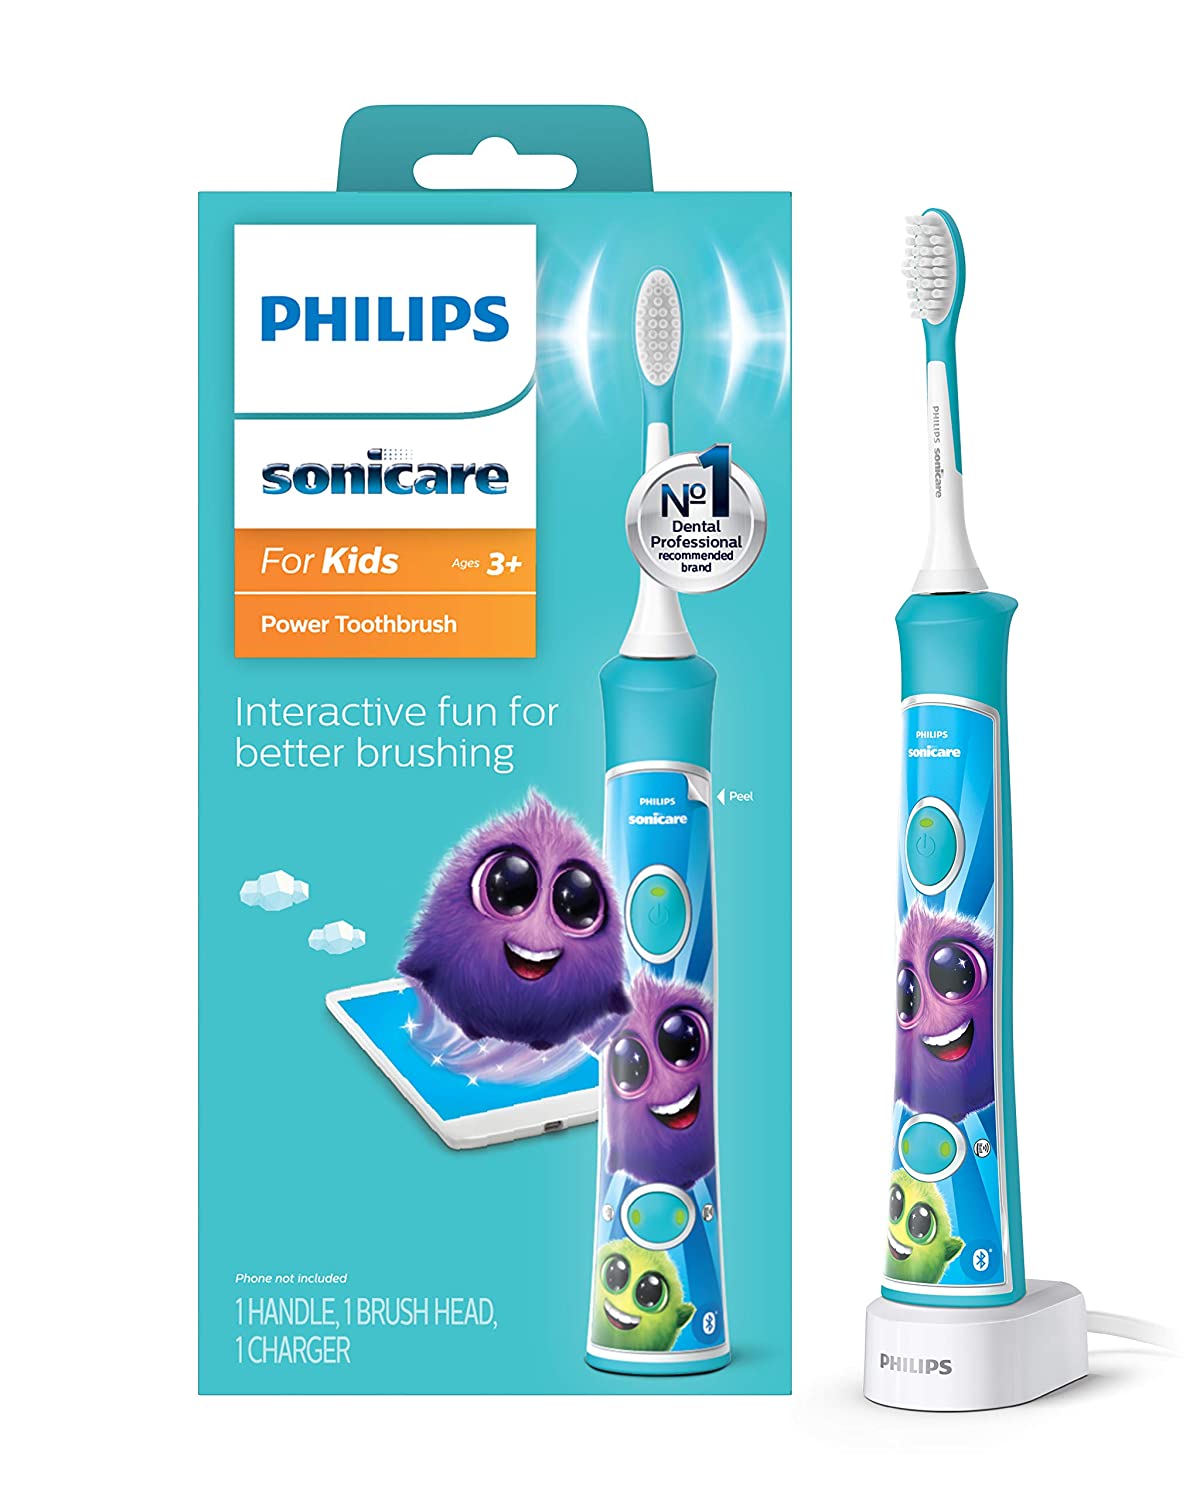 3. Philips Sonicare for Kids Electric Toothbrush